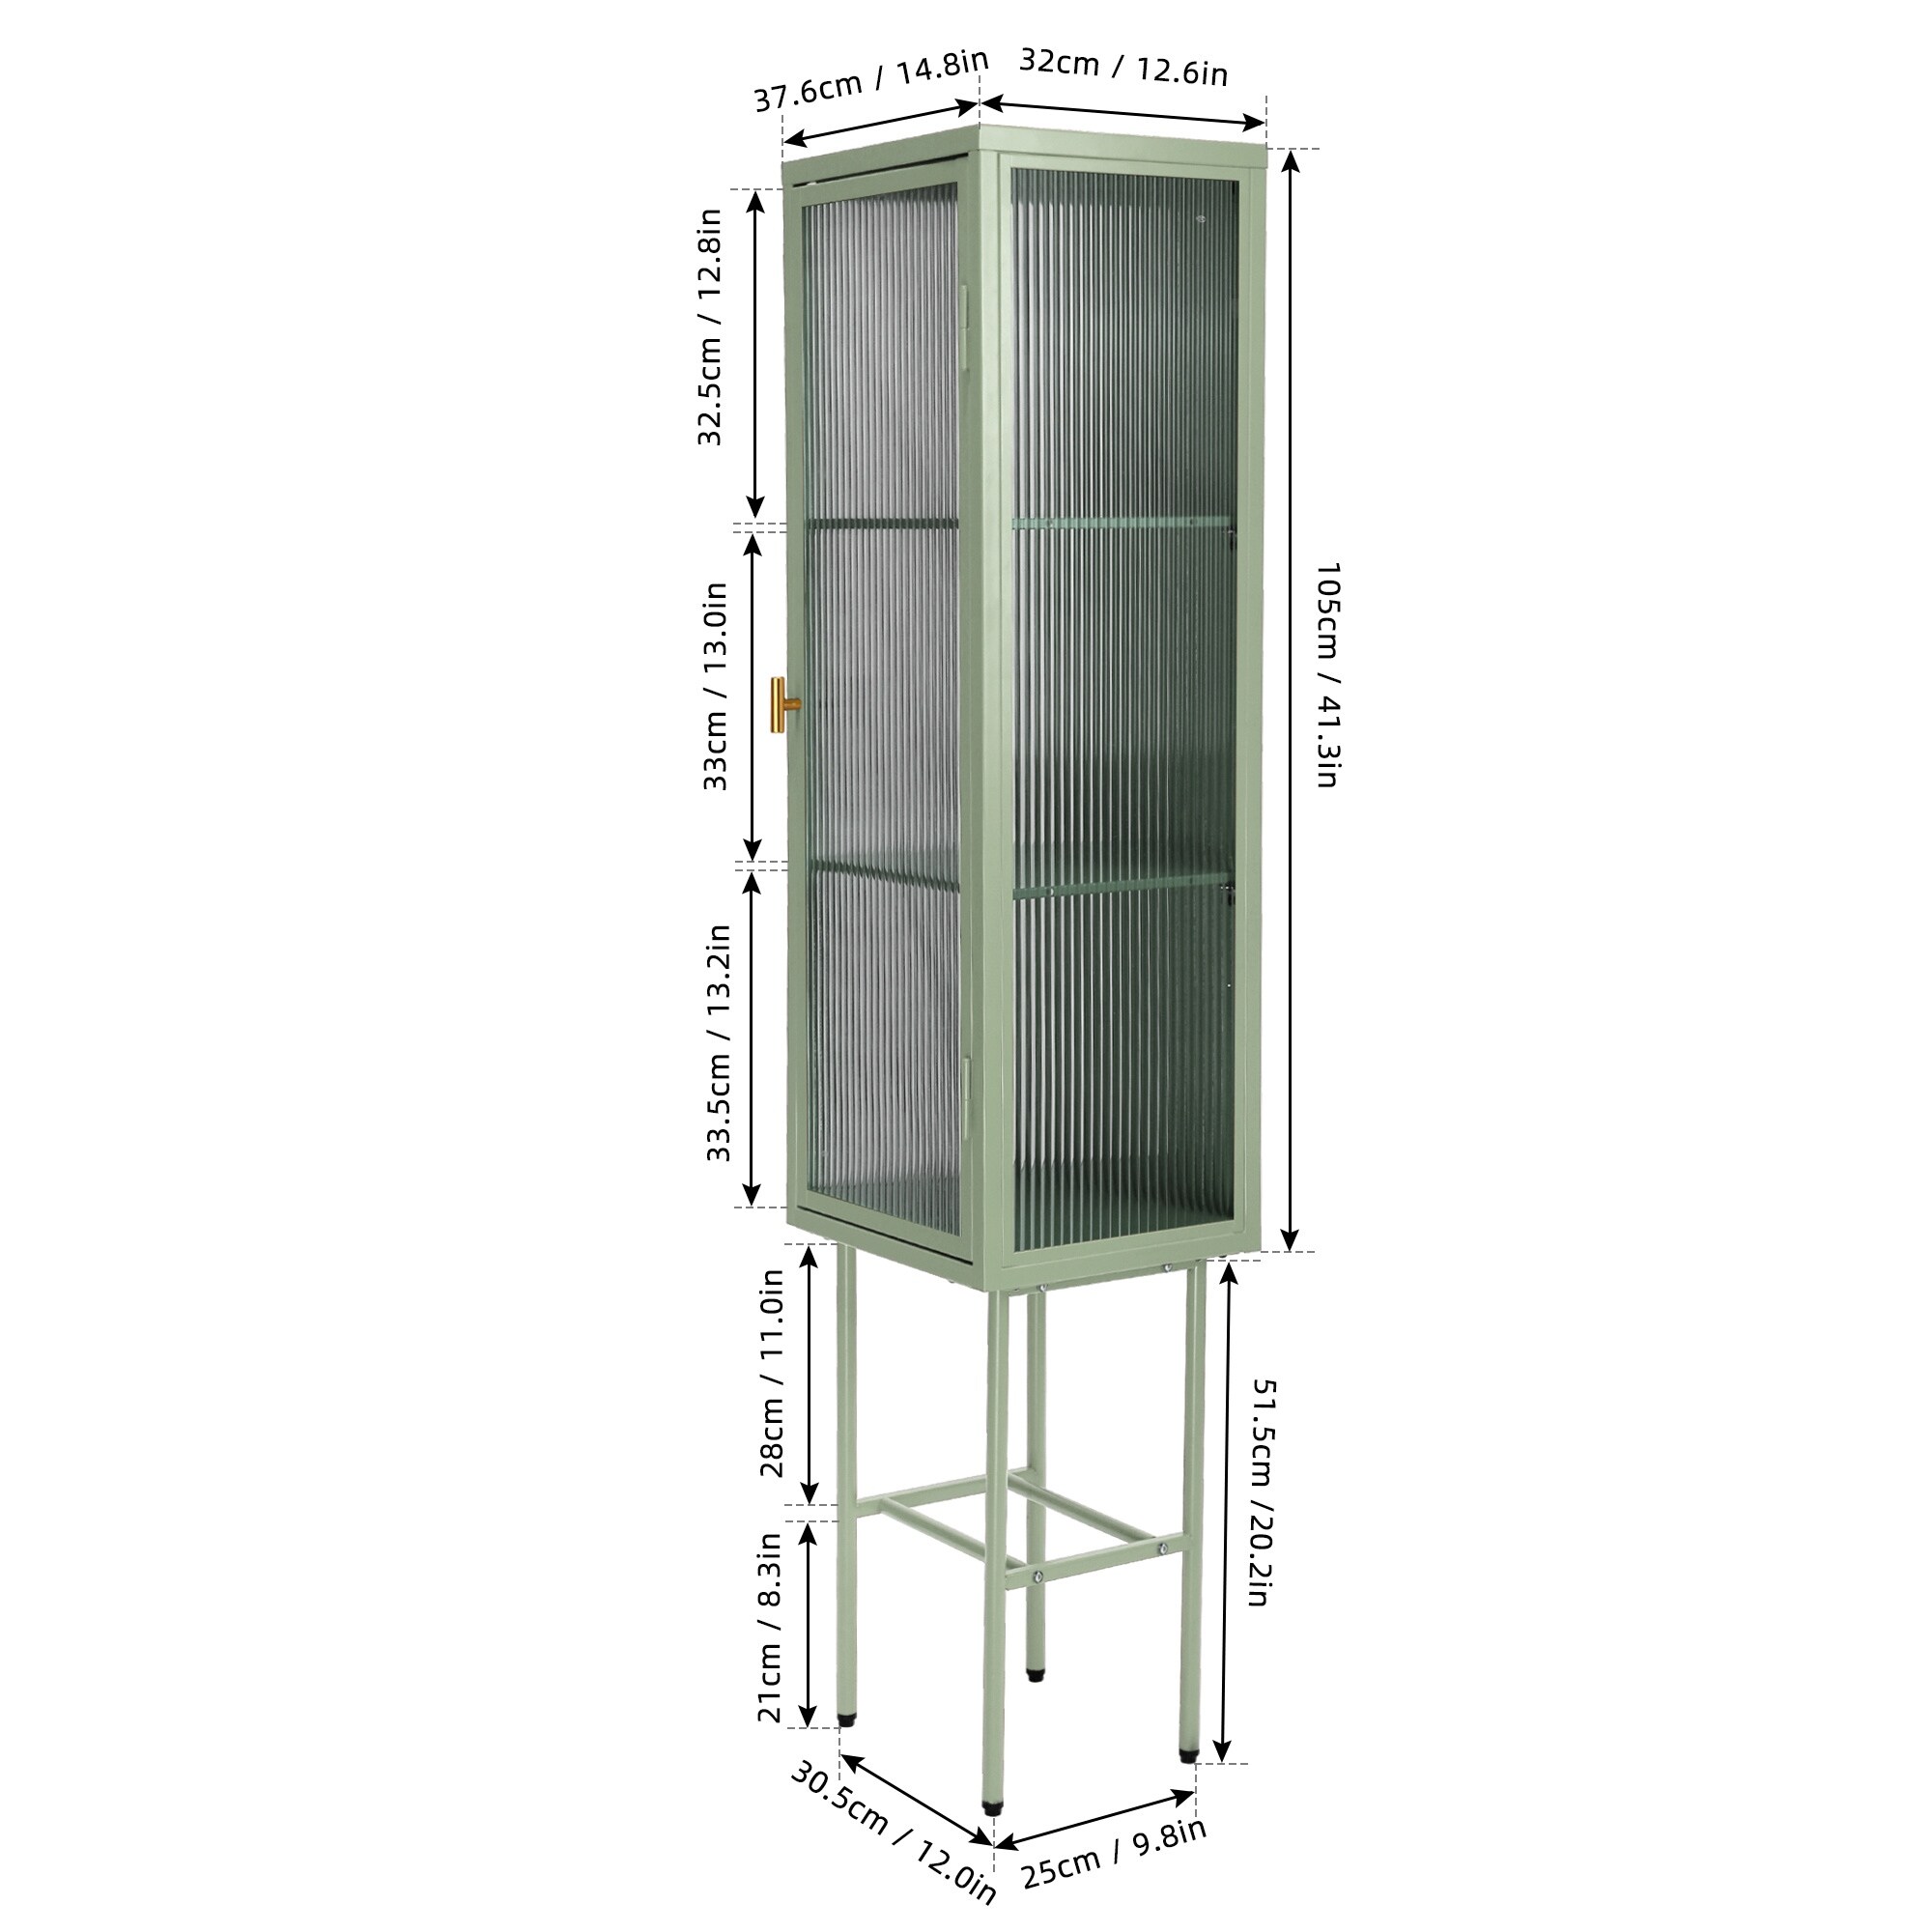 https://ak1.ostkcdn.com/images/products/is/images/direct/705a6f2df3c8e321ffe7206a44071d515958c85a/Retro-Style-Fluted-Glass-Tall-Bathroom-Storage-Cabinet.jpg